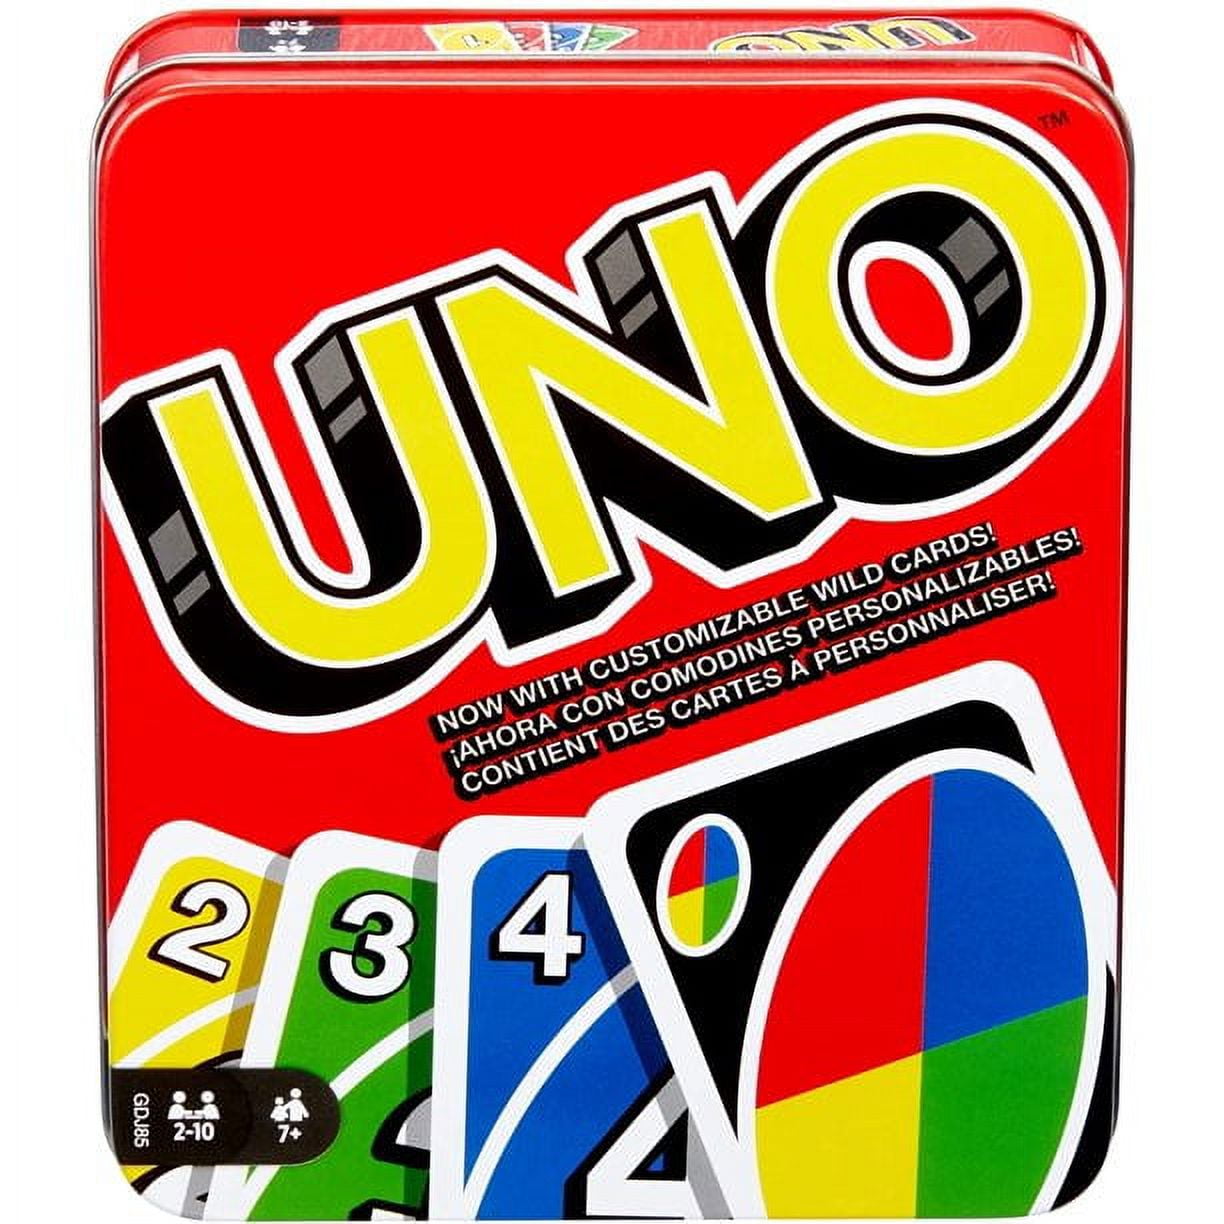 UNO - Classic Colour & Number Matching Card Game - 112 Cards - Customizable  & Erasable Wild - Special Action Cards Included - Gift for Kids 7+, W2087